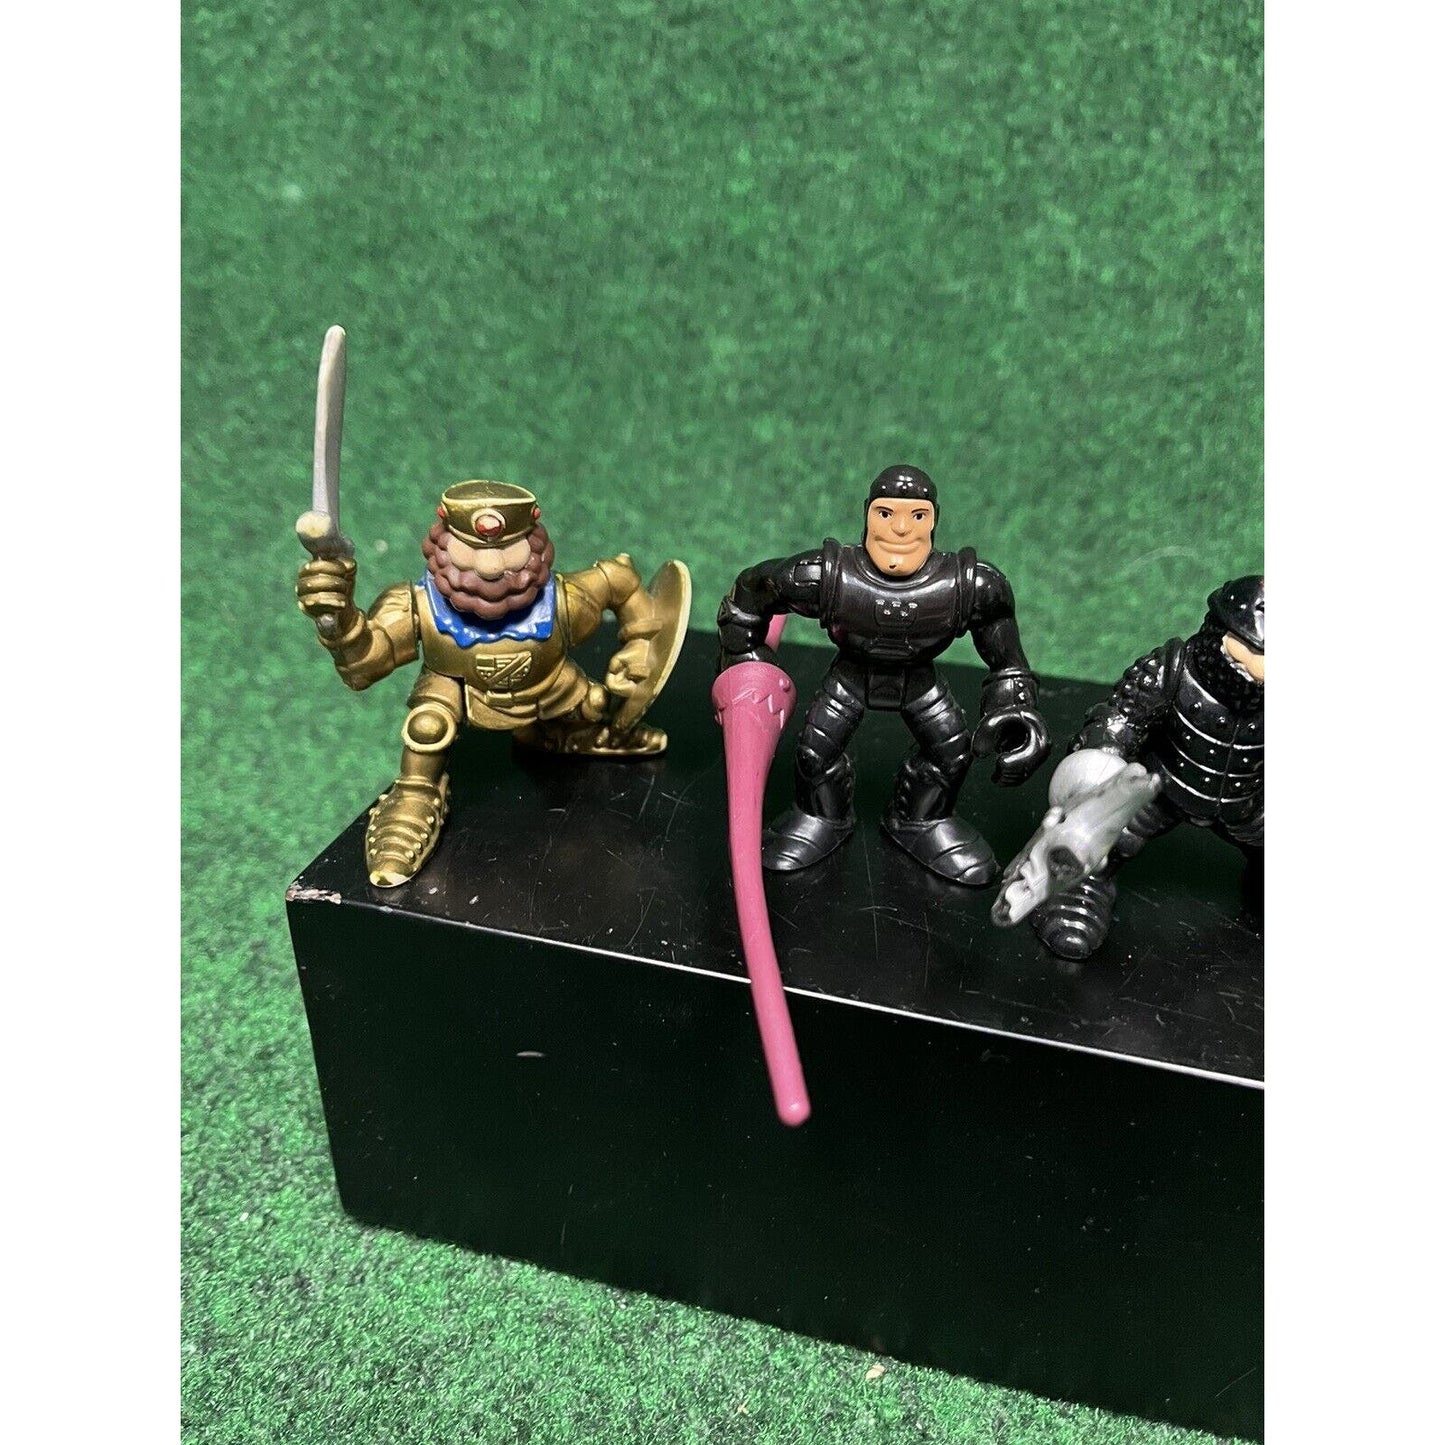 1994 Vtg Lot Of 4 Fisher Price Great Adventures Black Gold Knight Figures